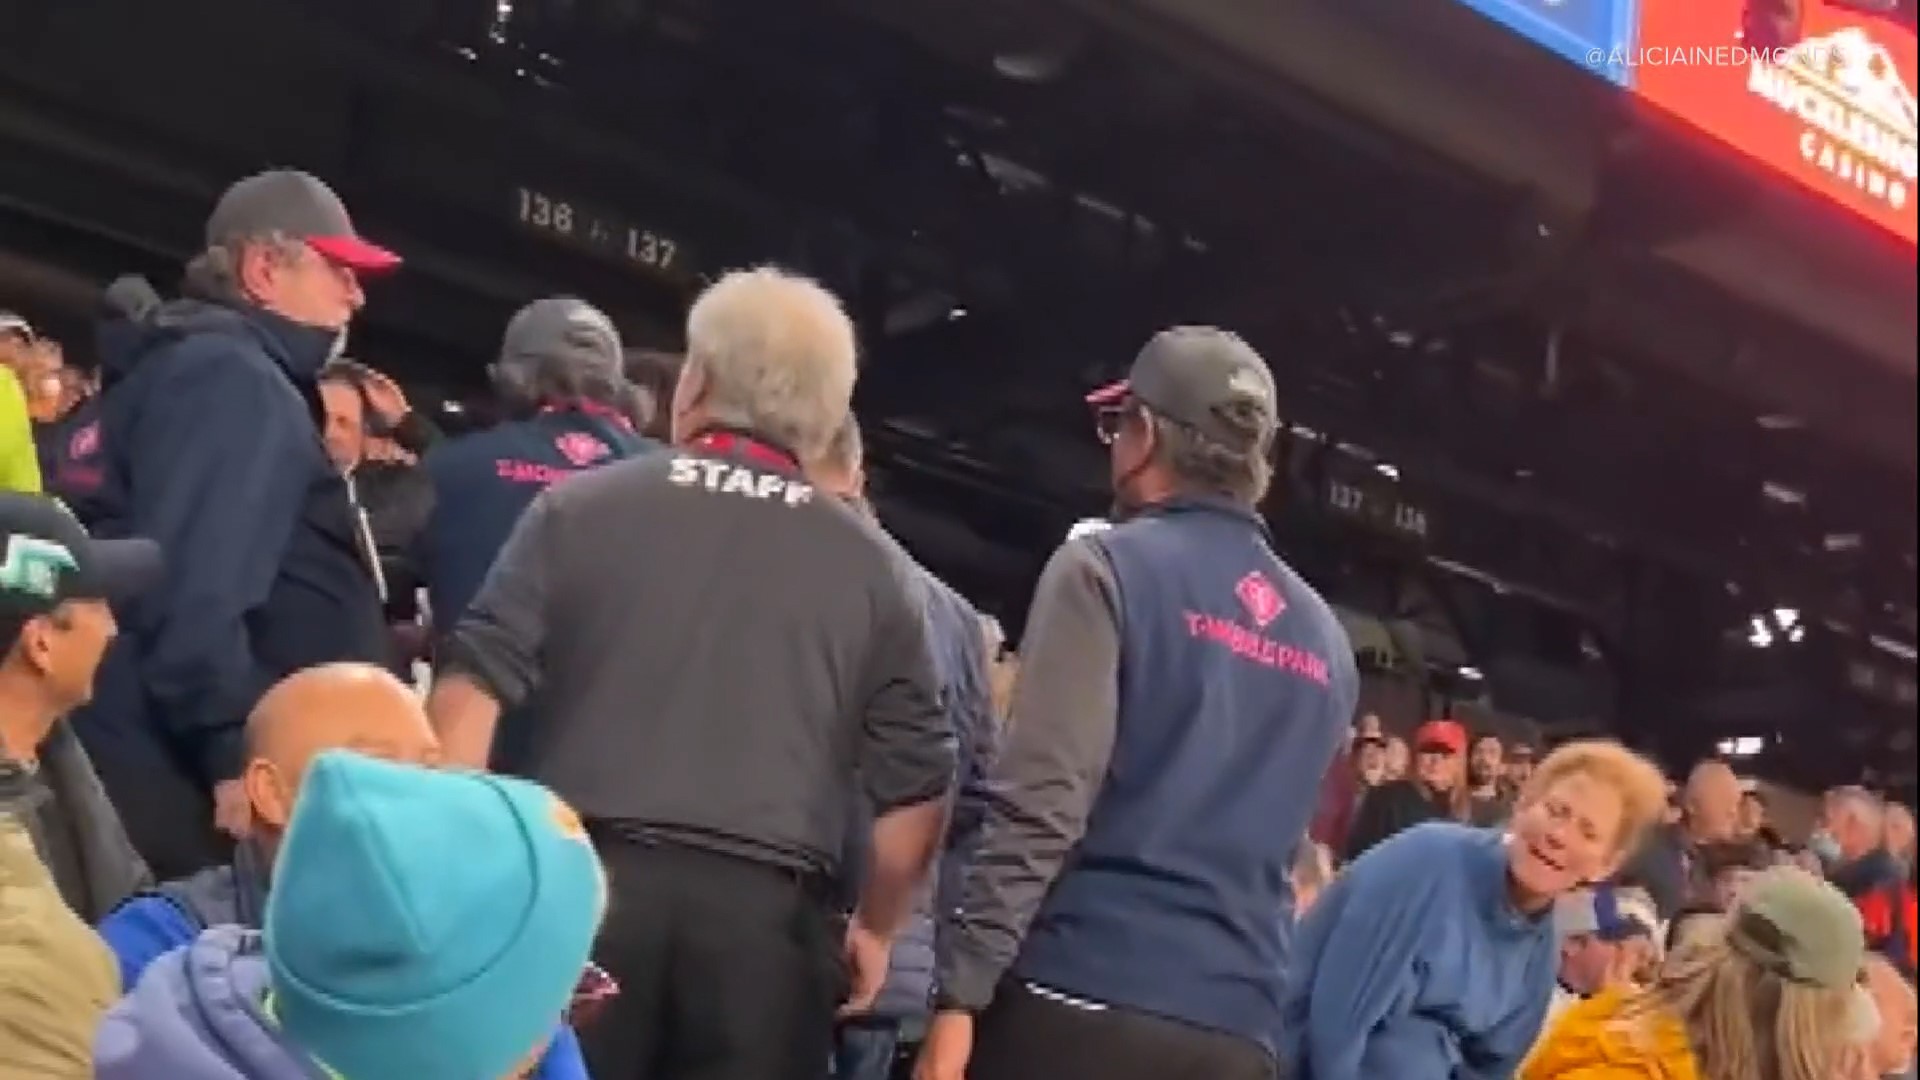 A fan was ejected from the Mariners game Tuesday night after hitting pitcher George Kirby with a ball he threw back on the field